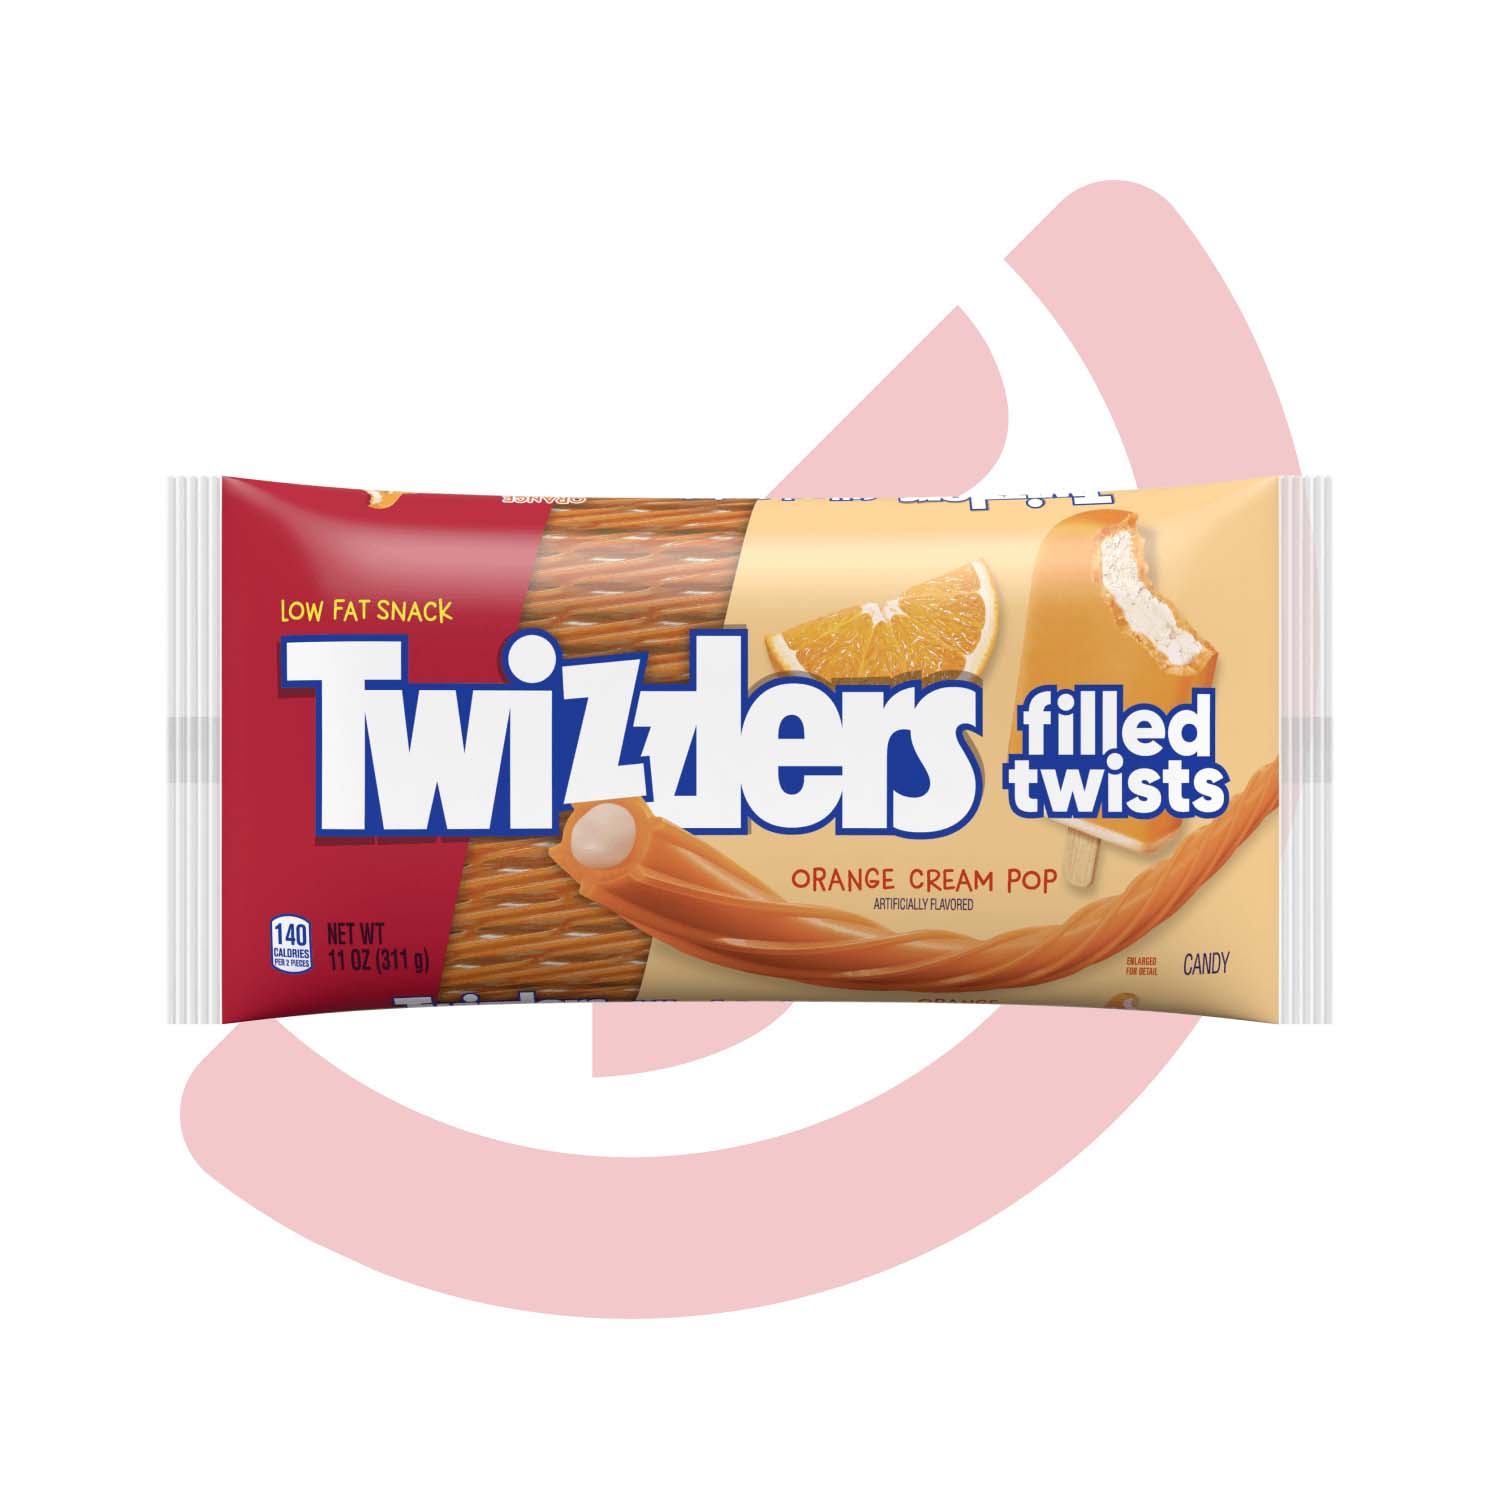 bag of twizzlers filled twists orange cream pop flavored candy